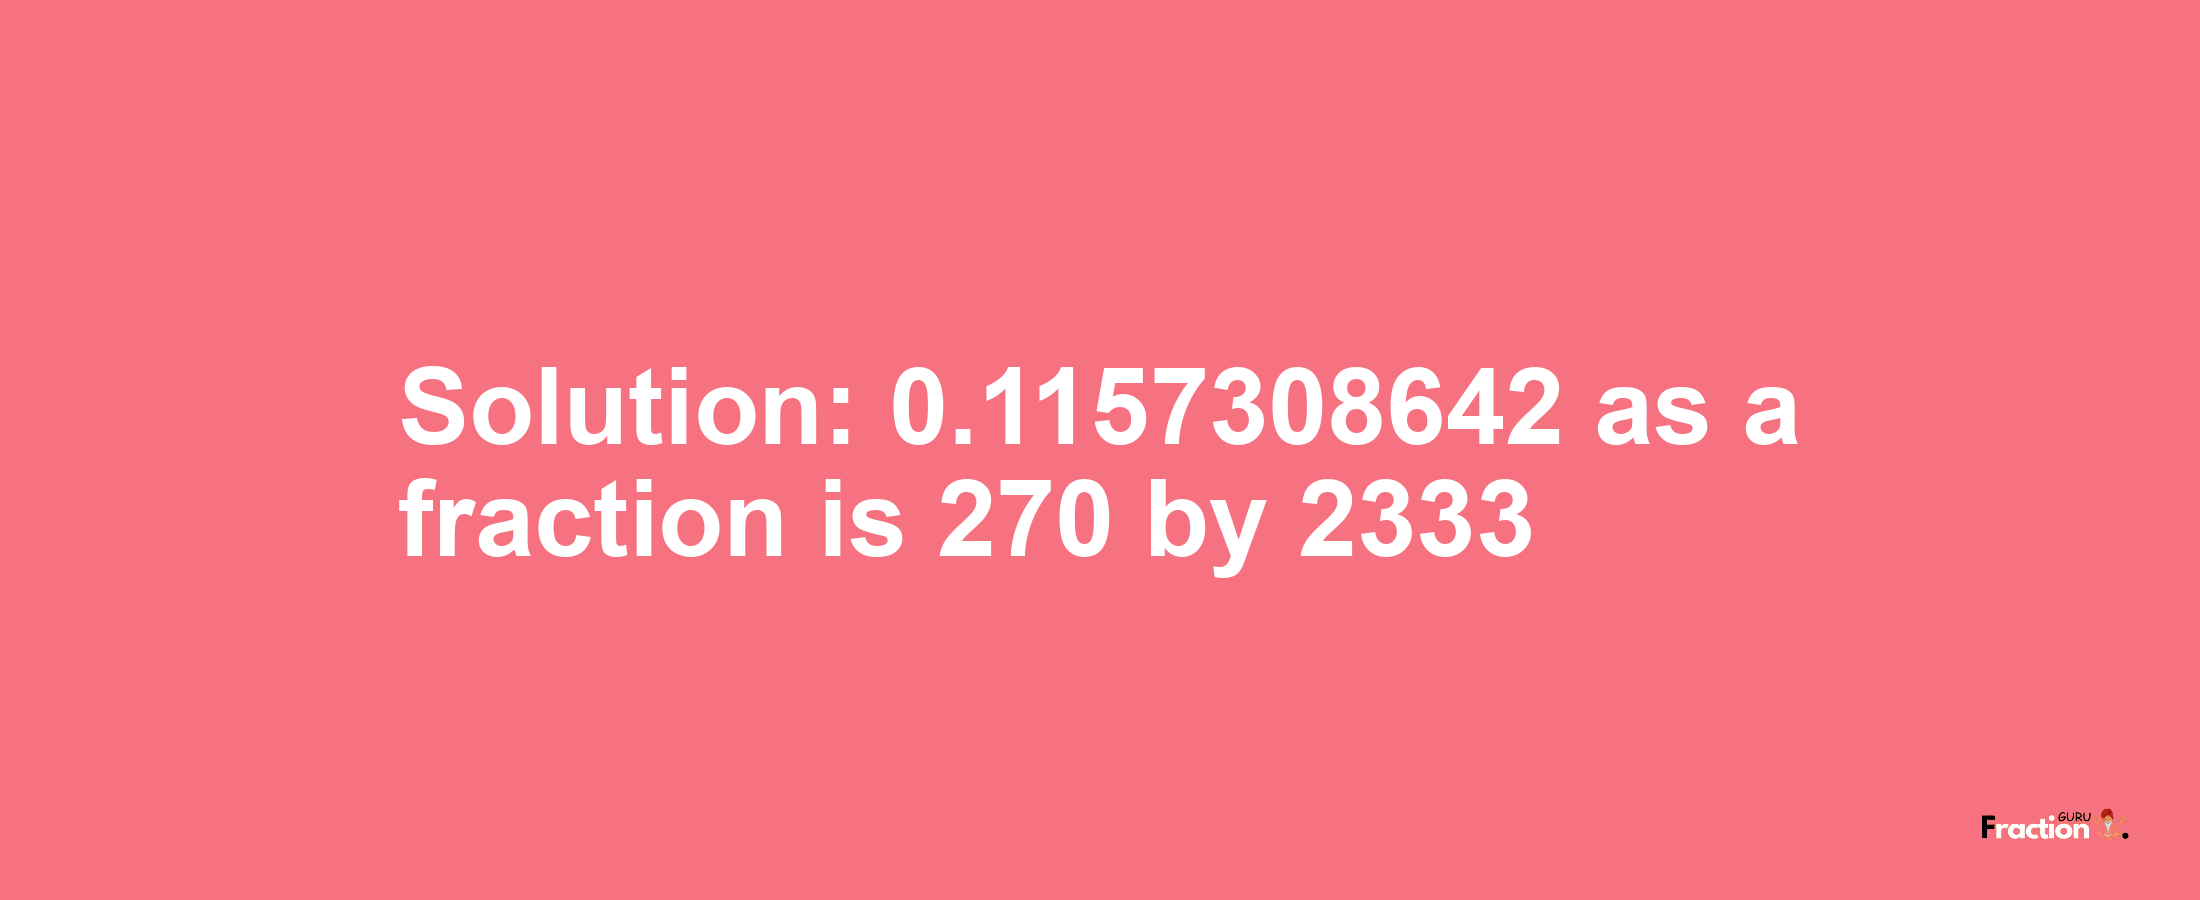 Solution:0.1157308642 as a fraction is 270/2333